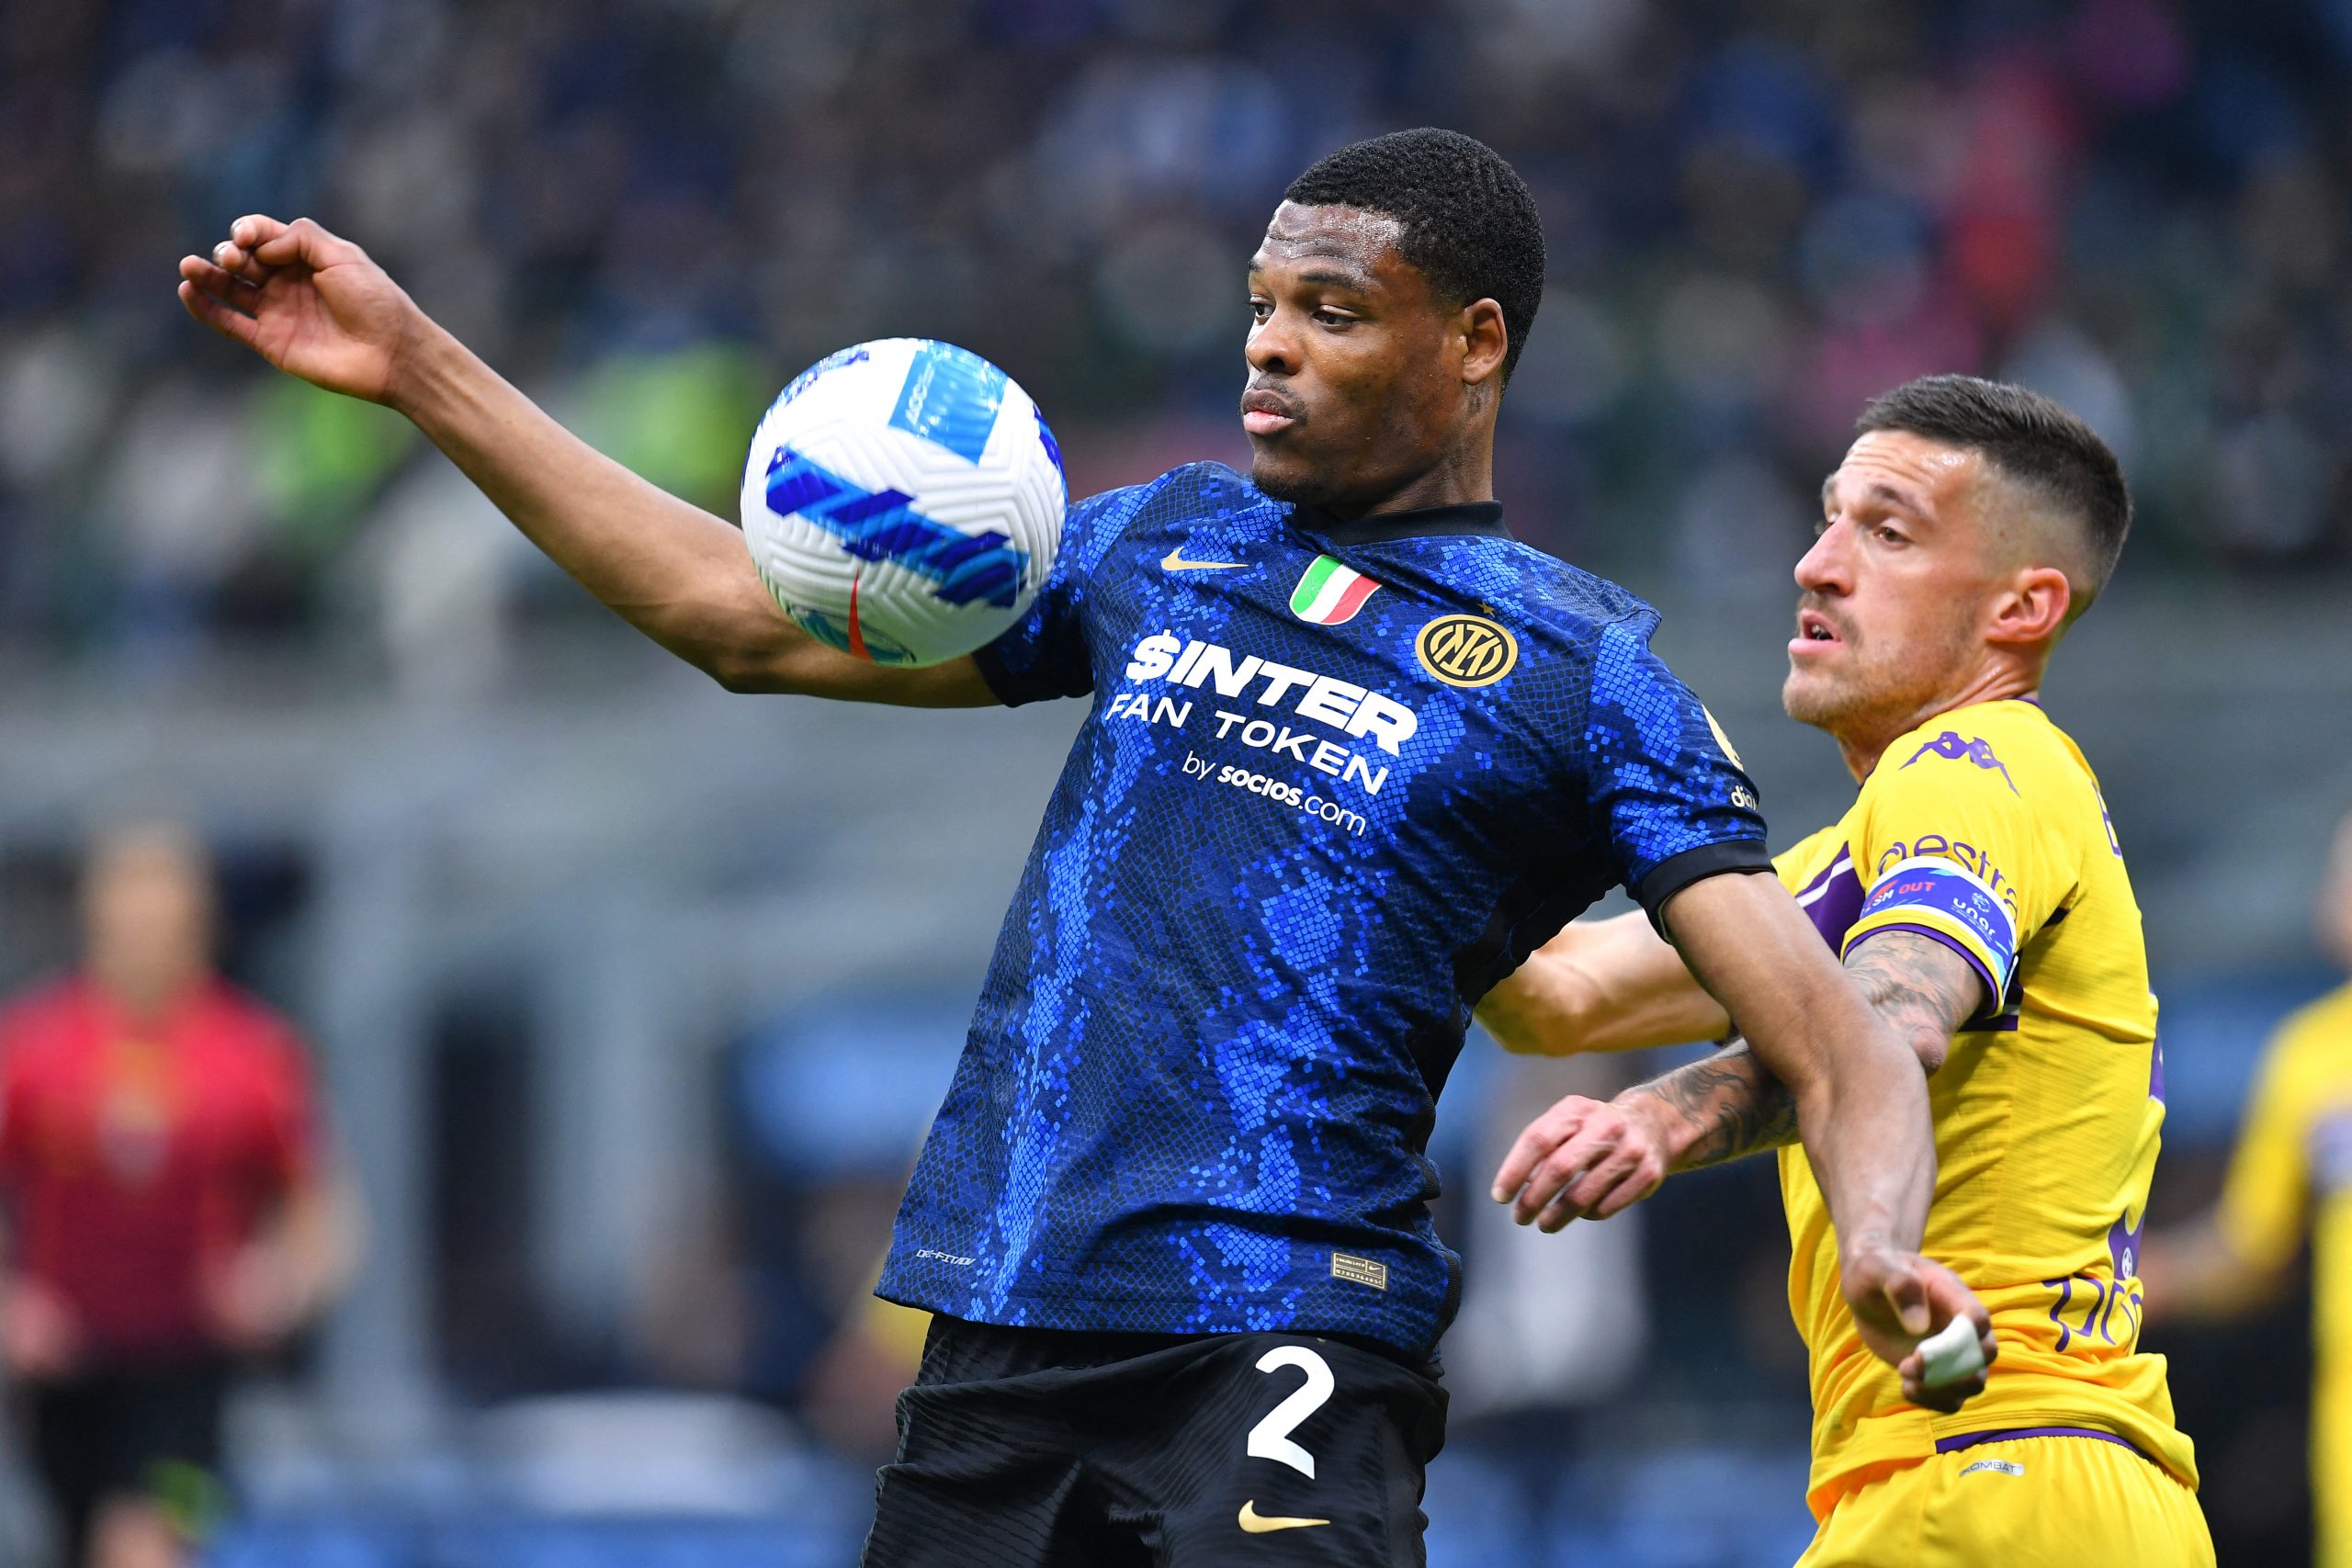 denzel-dumfries-inter-milan-transfer-news-serie-a-chelsea-transfer-news-romano-update-givemesport-cfc-tuchel-boehly-transfer-target-top-priority